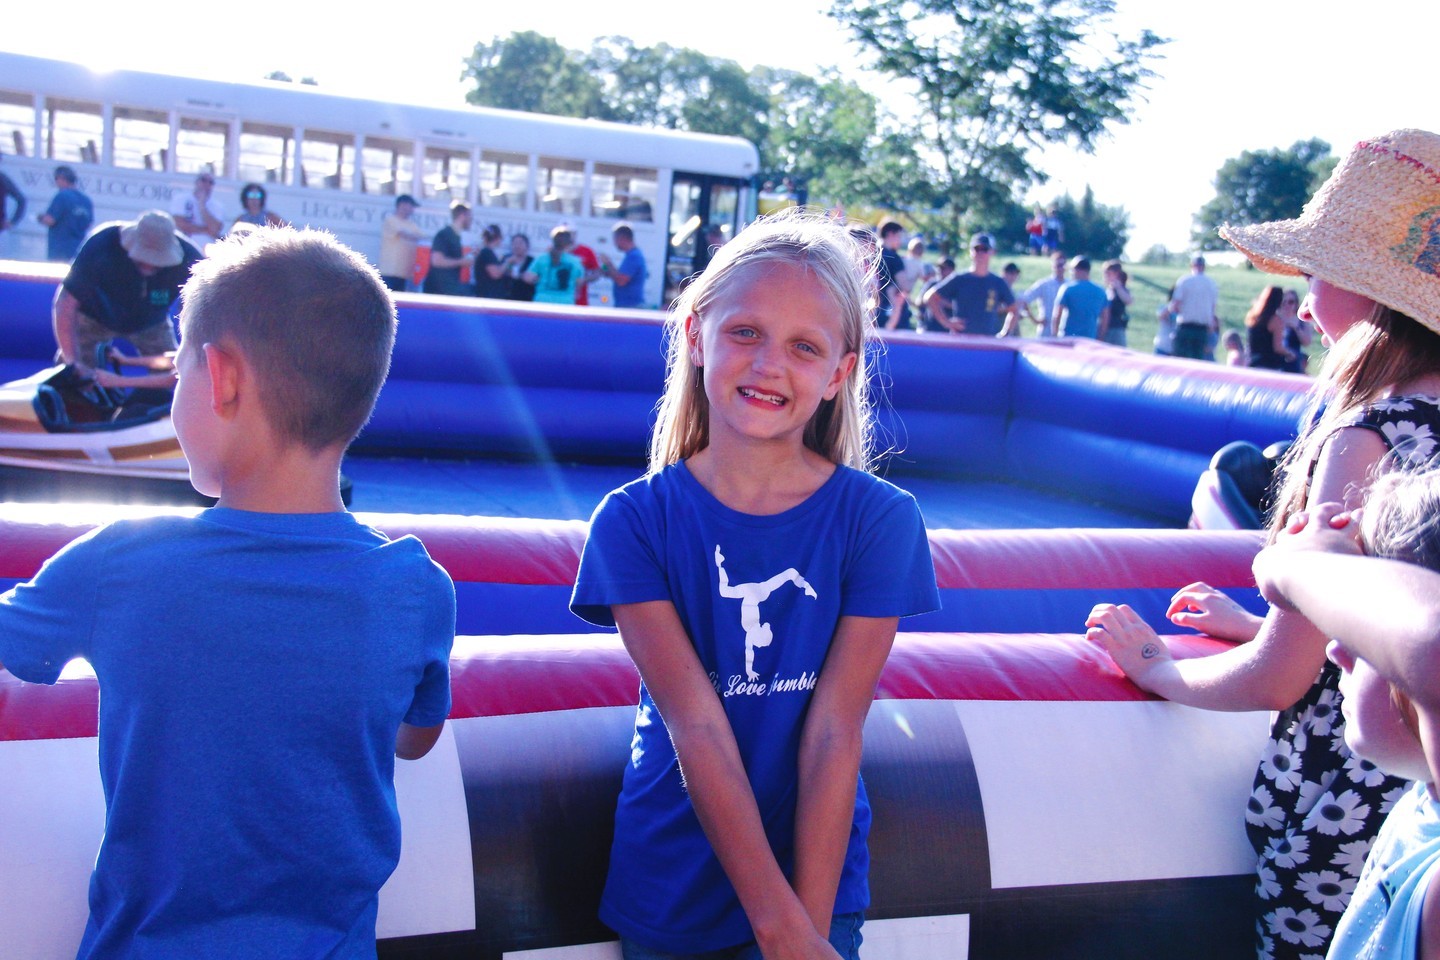 All smiles at Legacy! There are tons of opportunities for families to connect and grow at church!